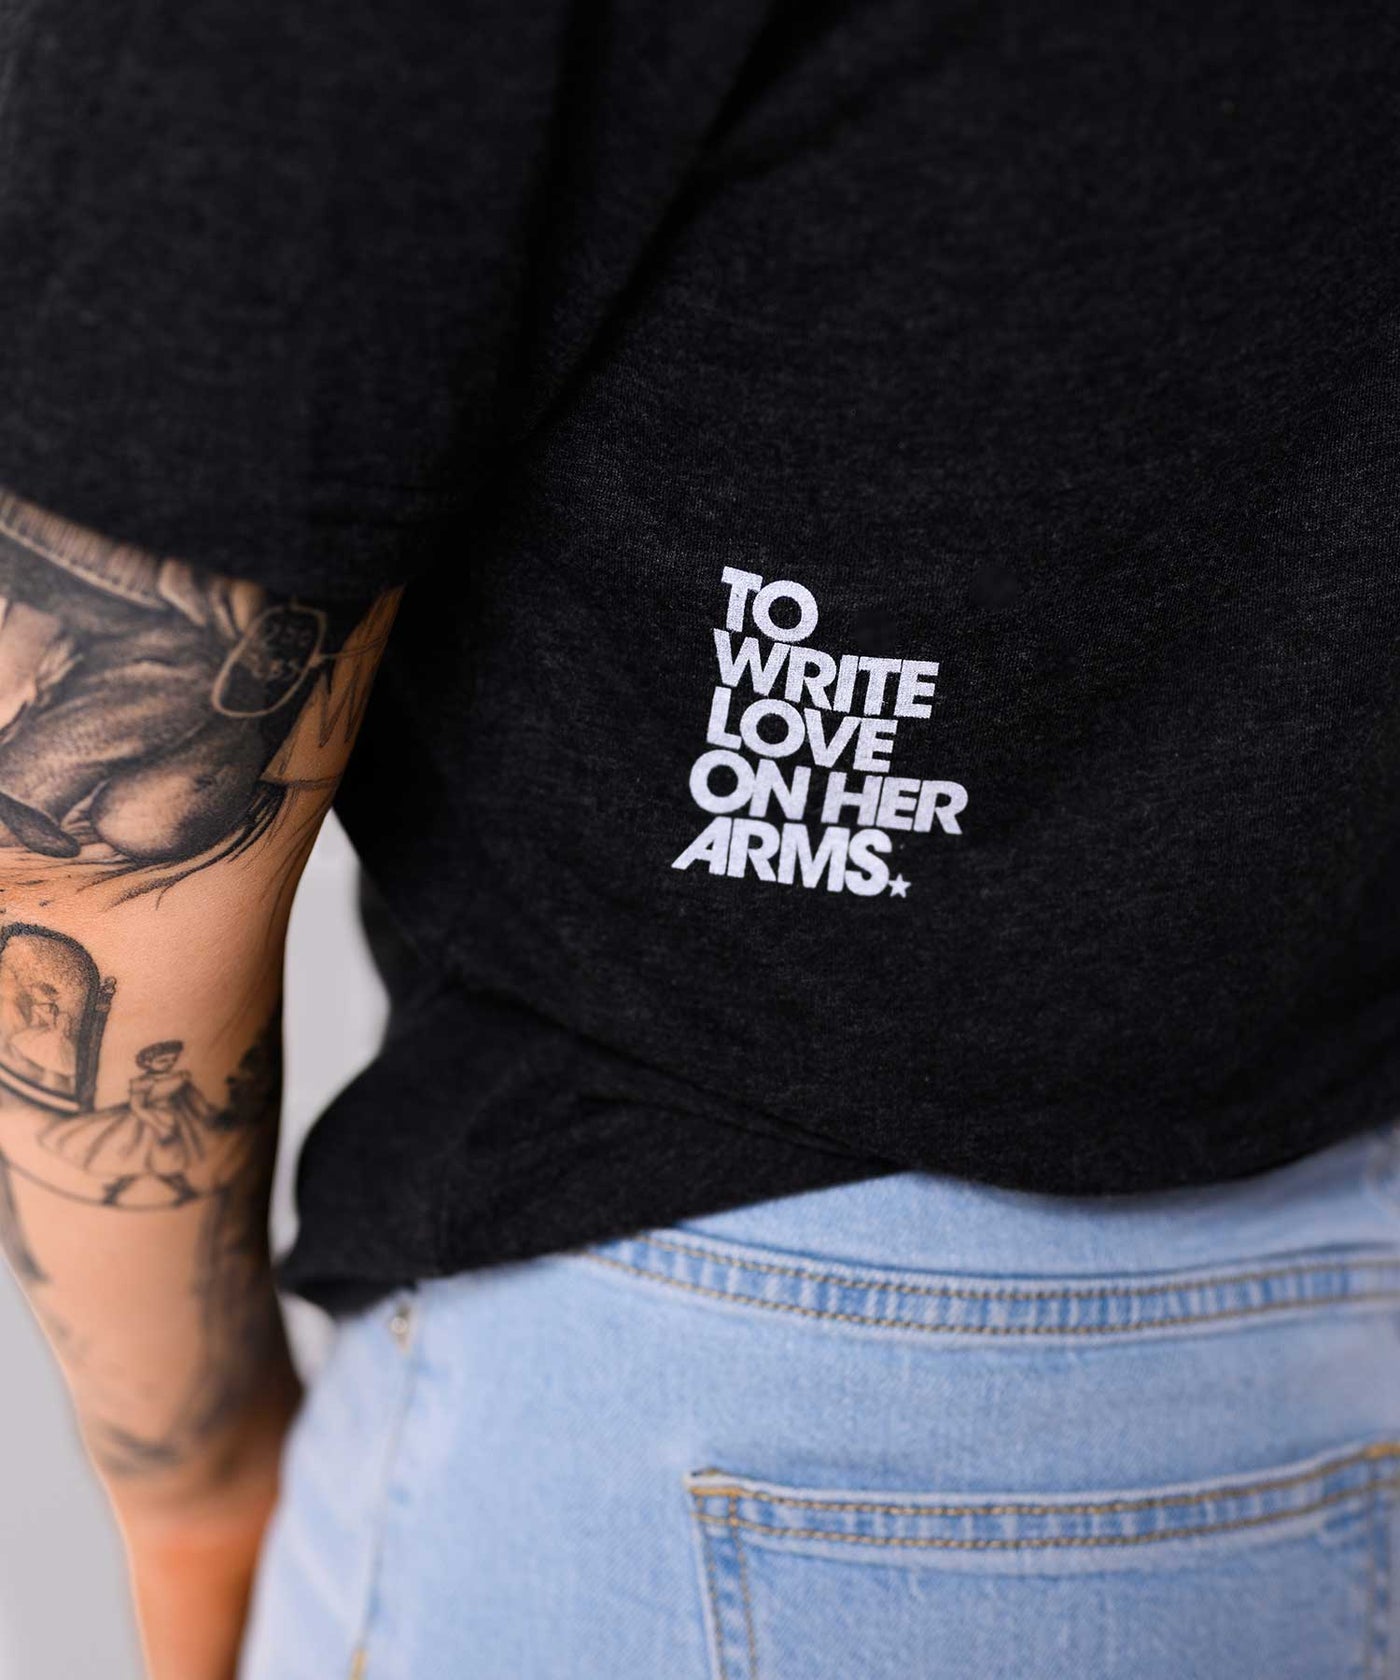 Other People Shirt – To Write Love on Her Arms.